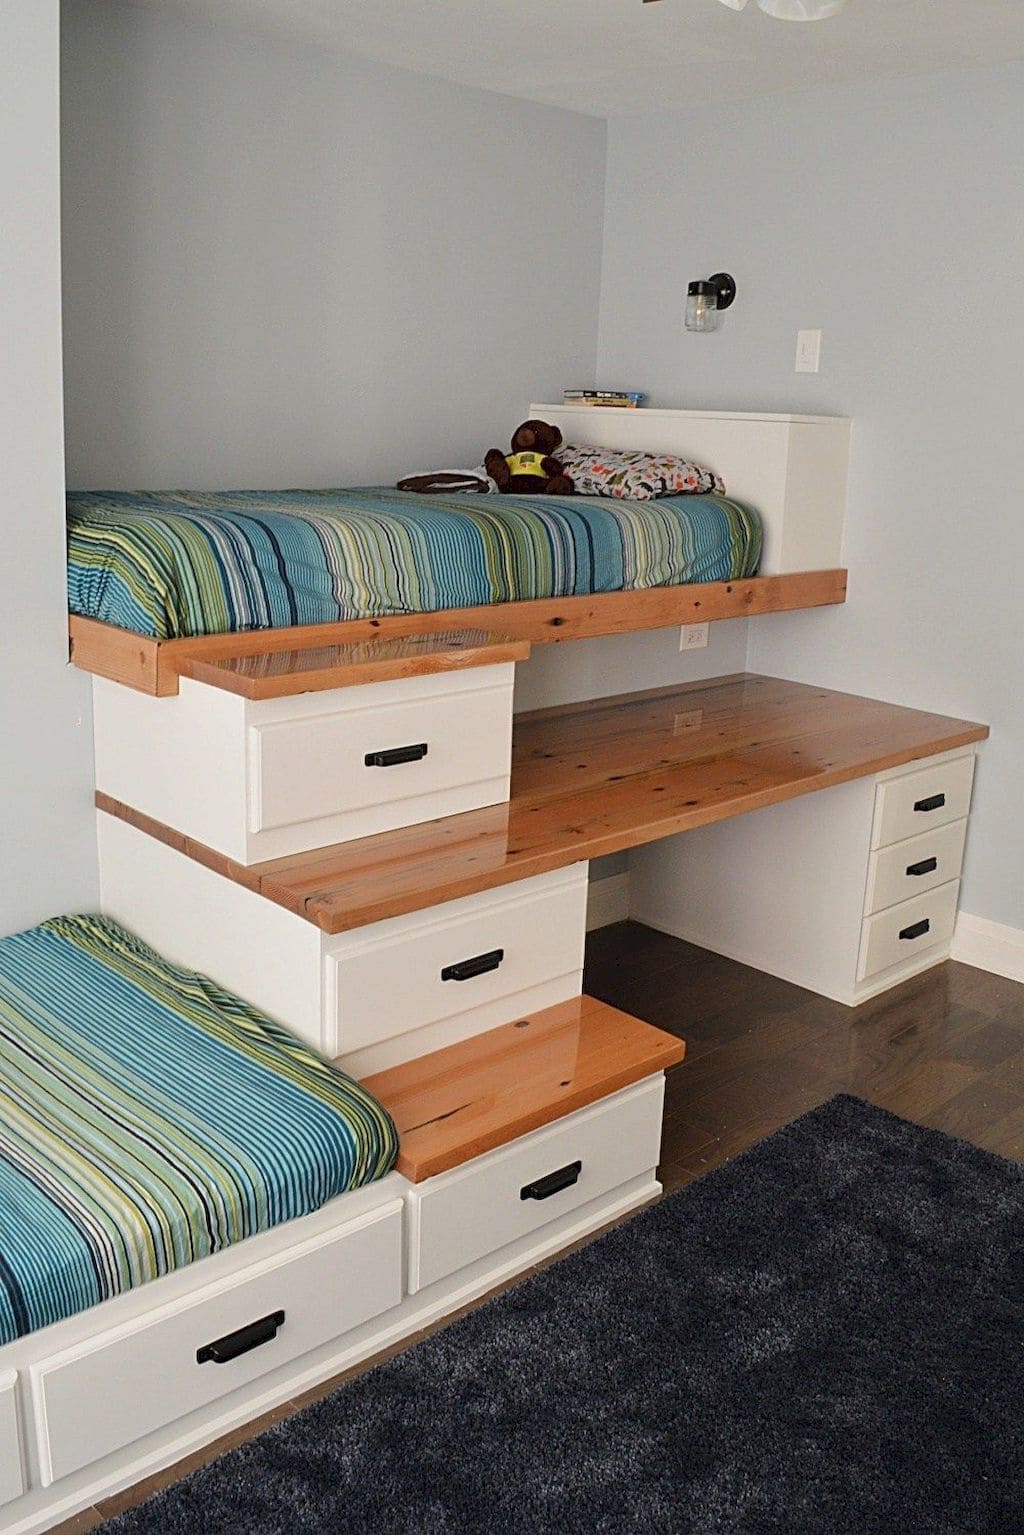 23 creative storage bed ideas to add to your bag - 193